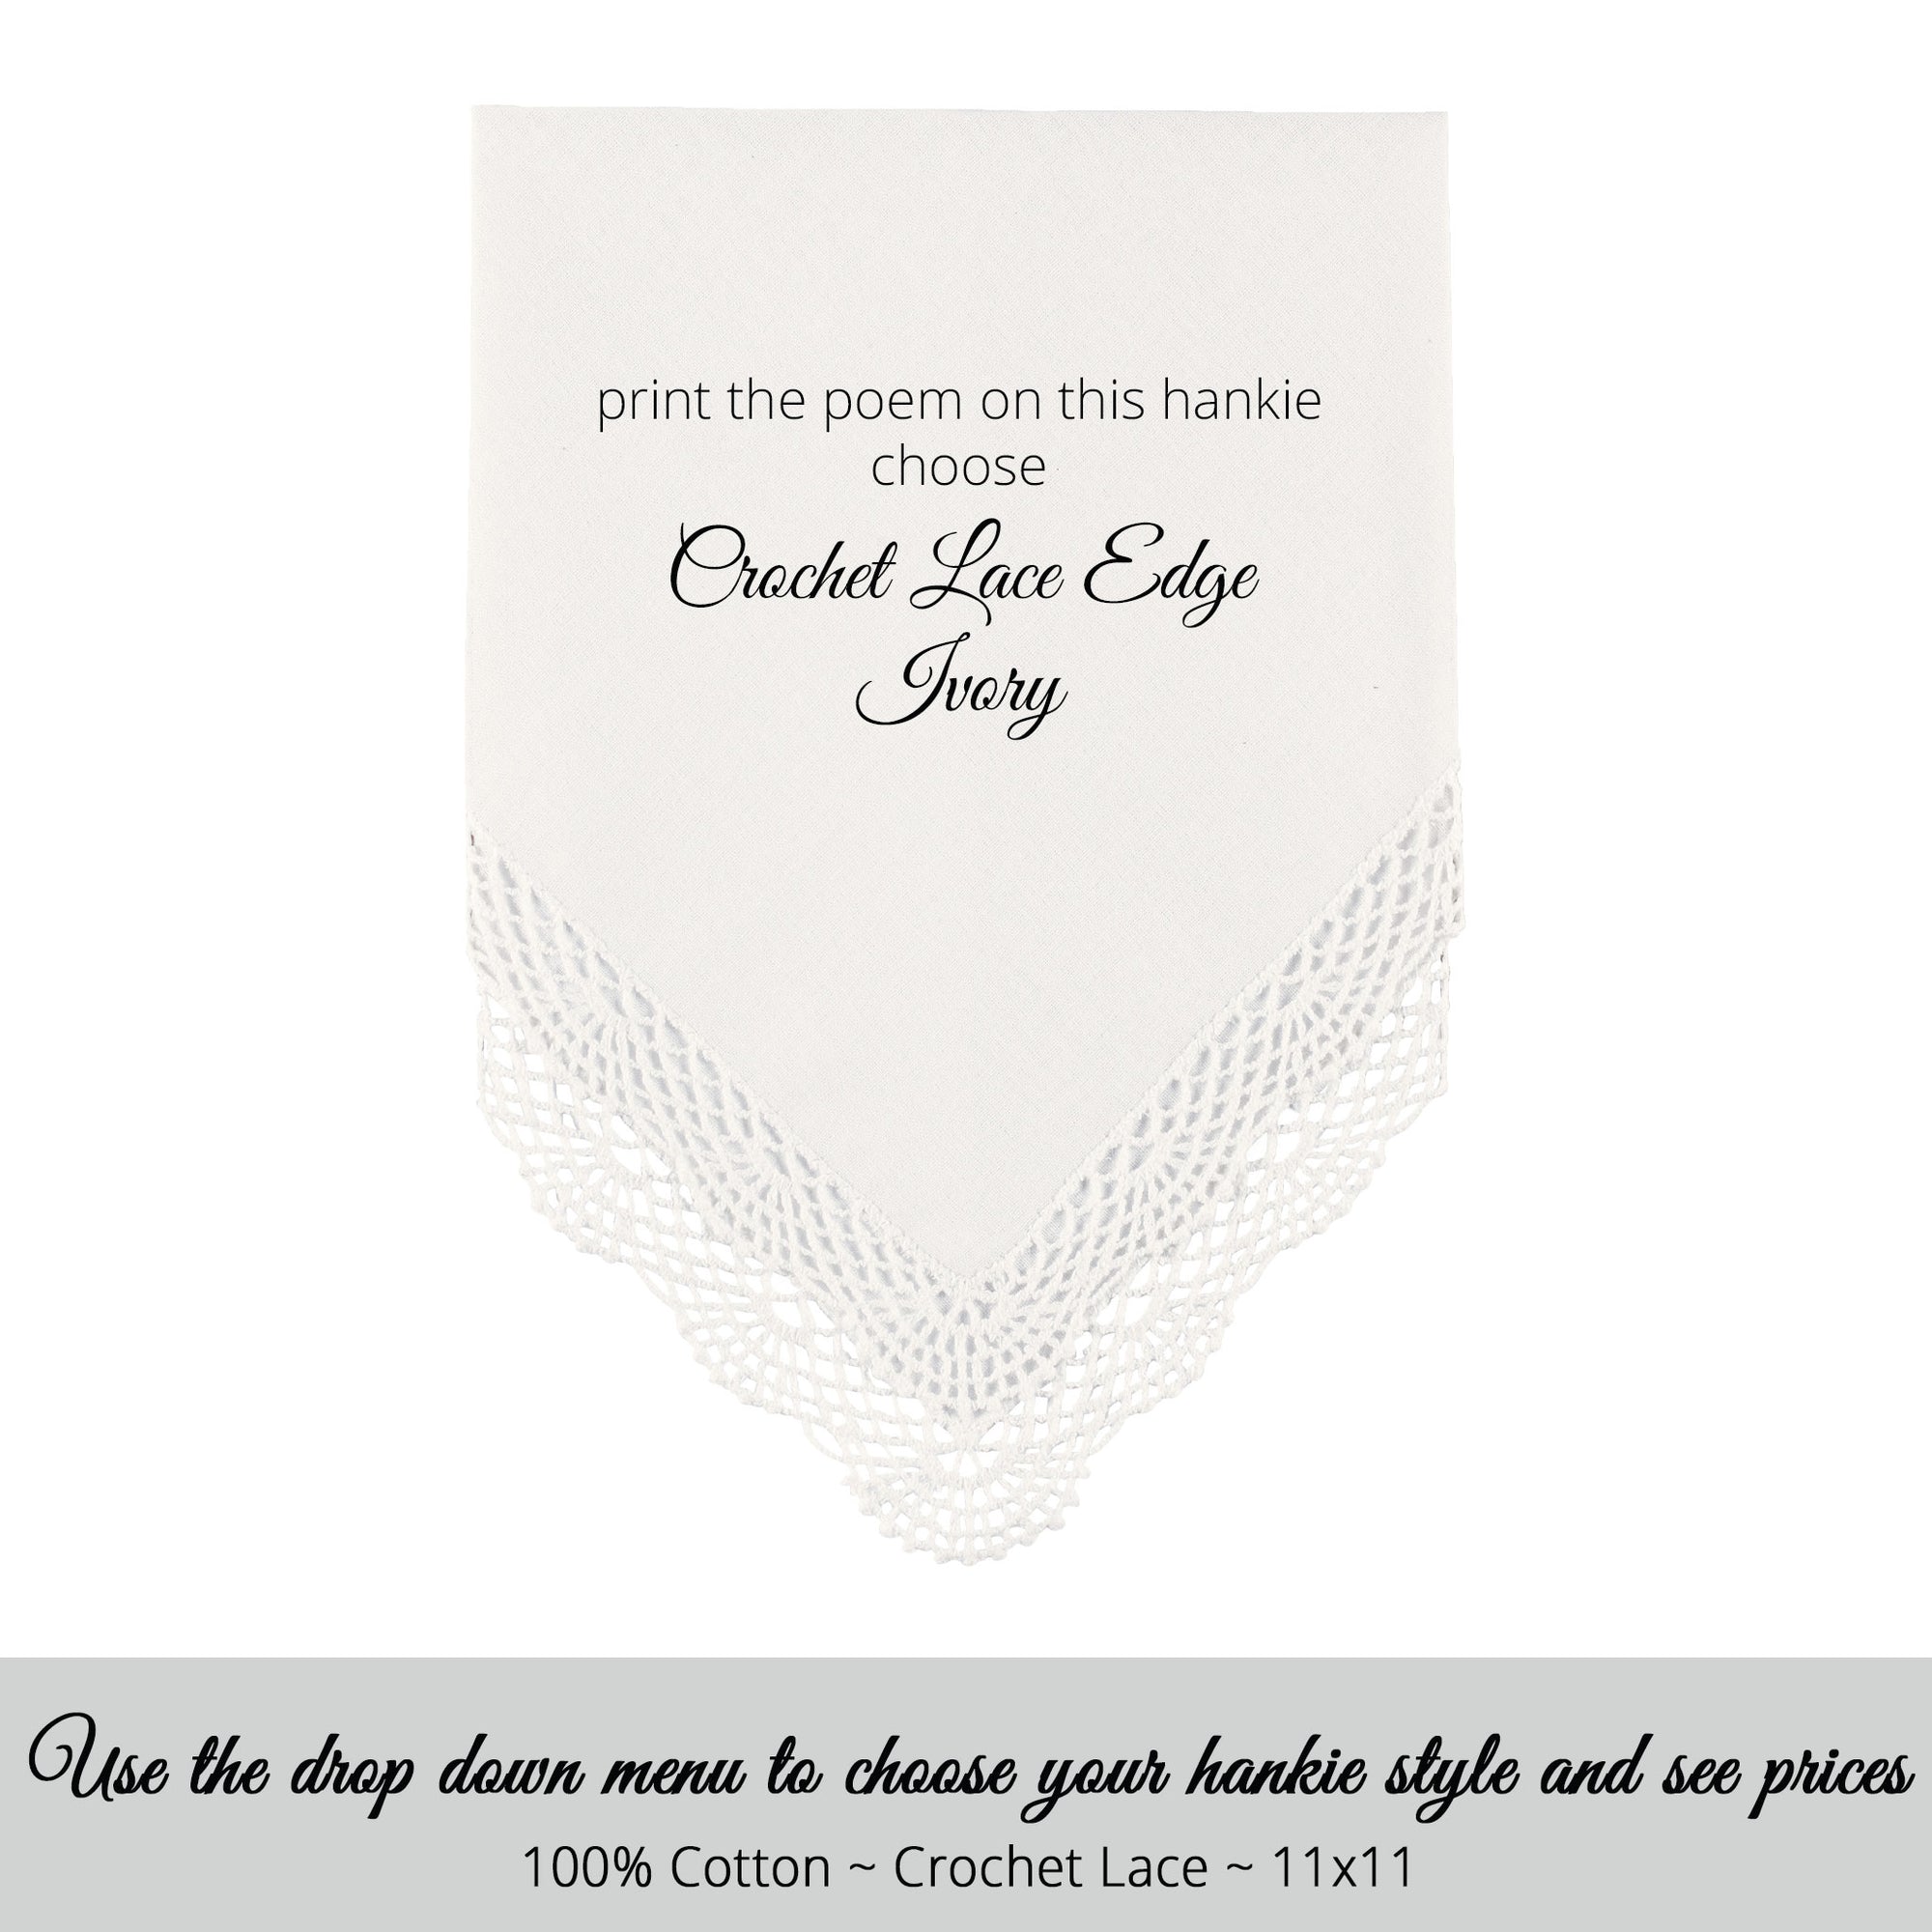 Wedding Handkerchief Scalloped edge white personalized poem for the mother of the groom